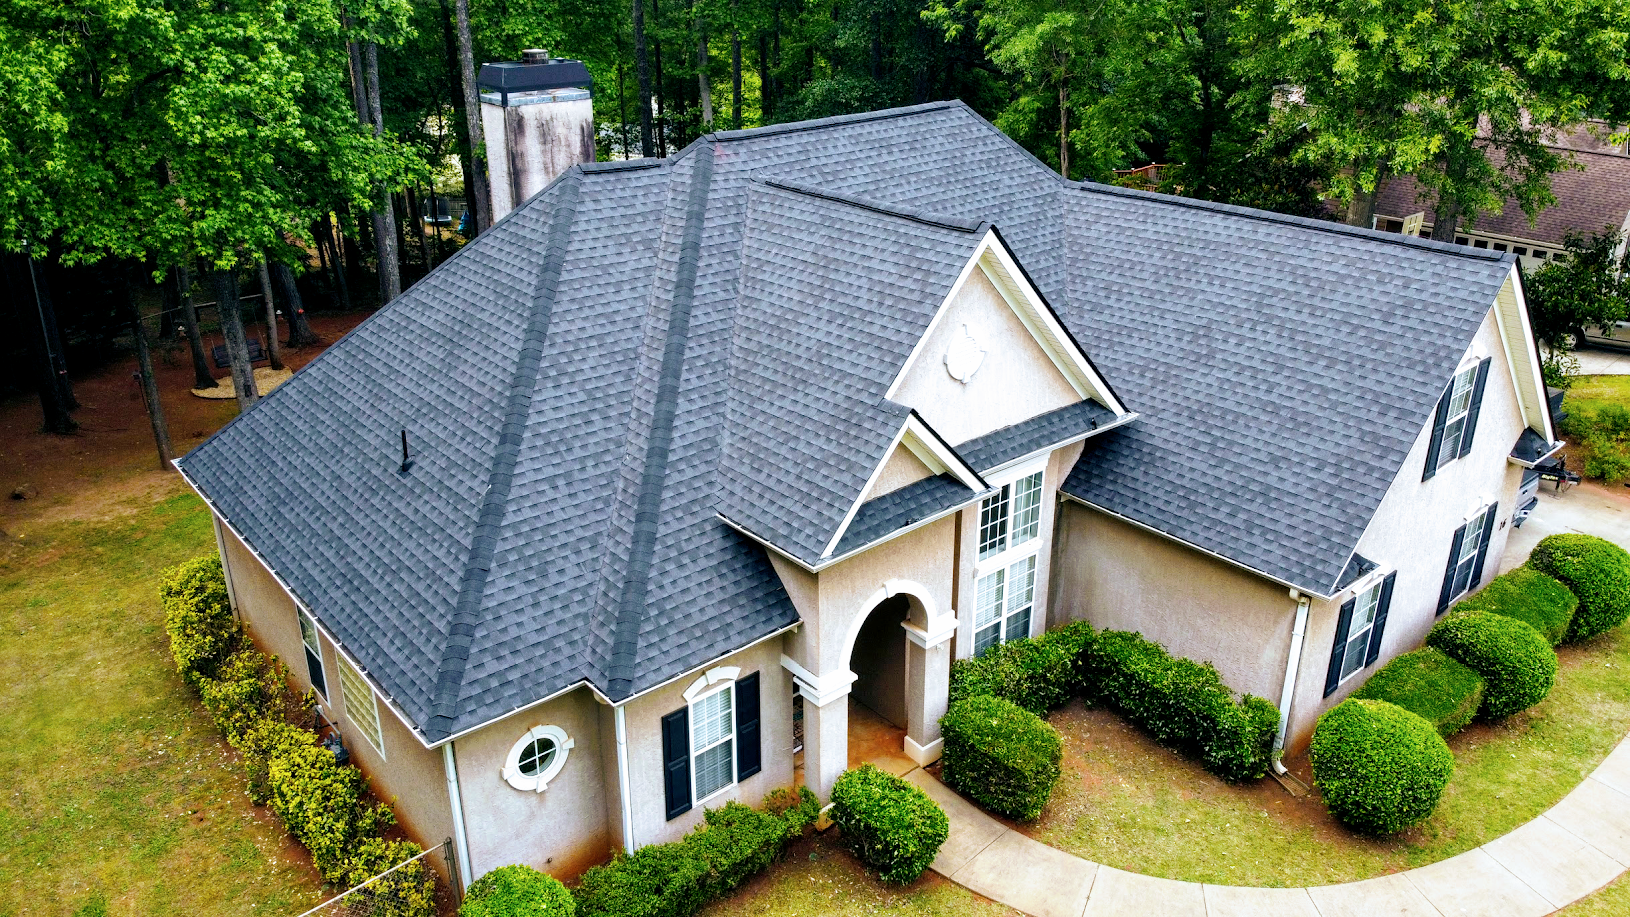 Remove & Replace Roofing, LLC